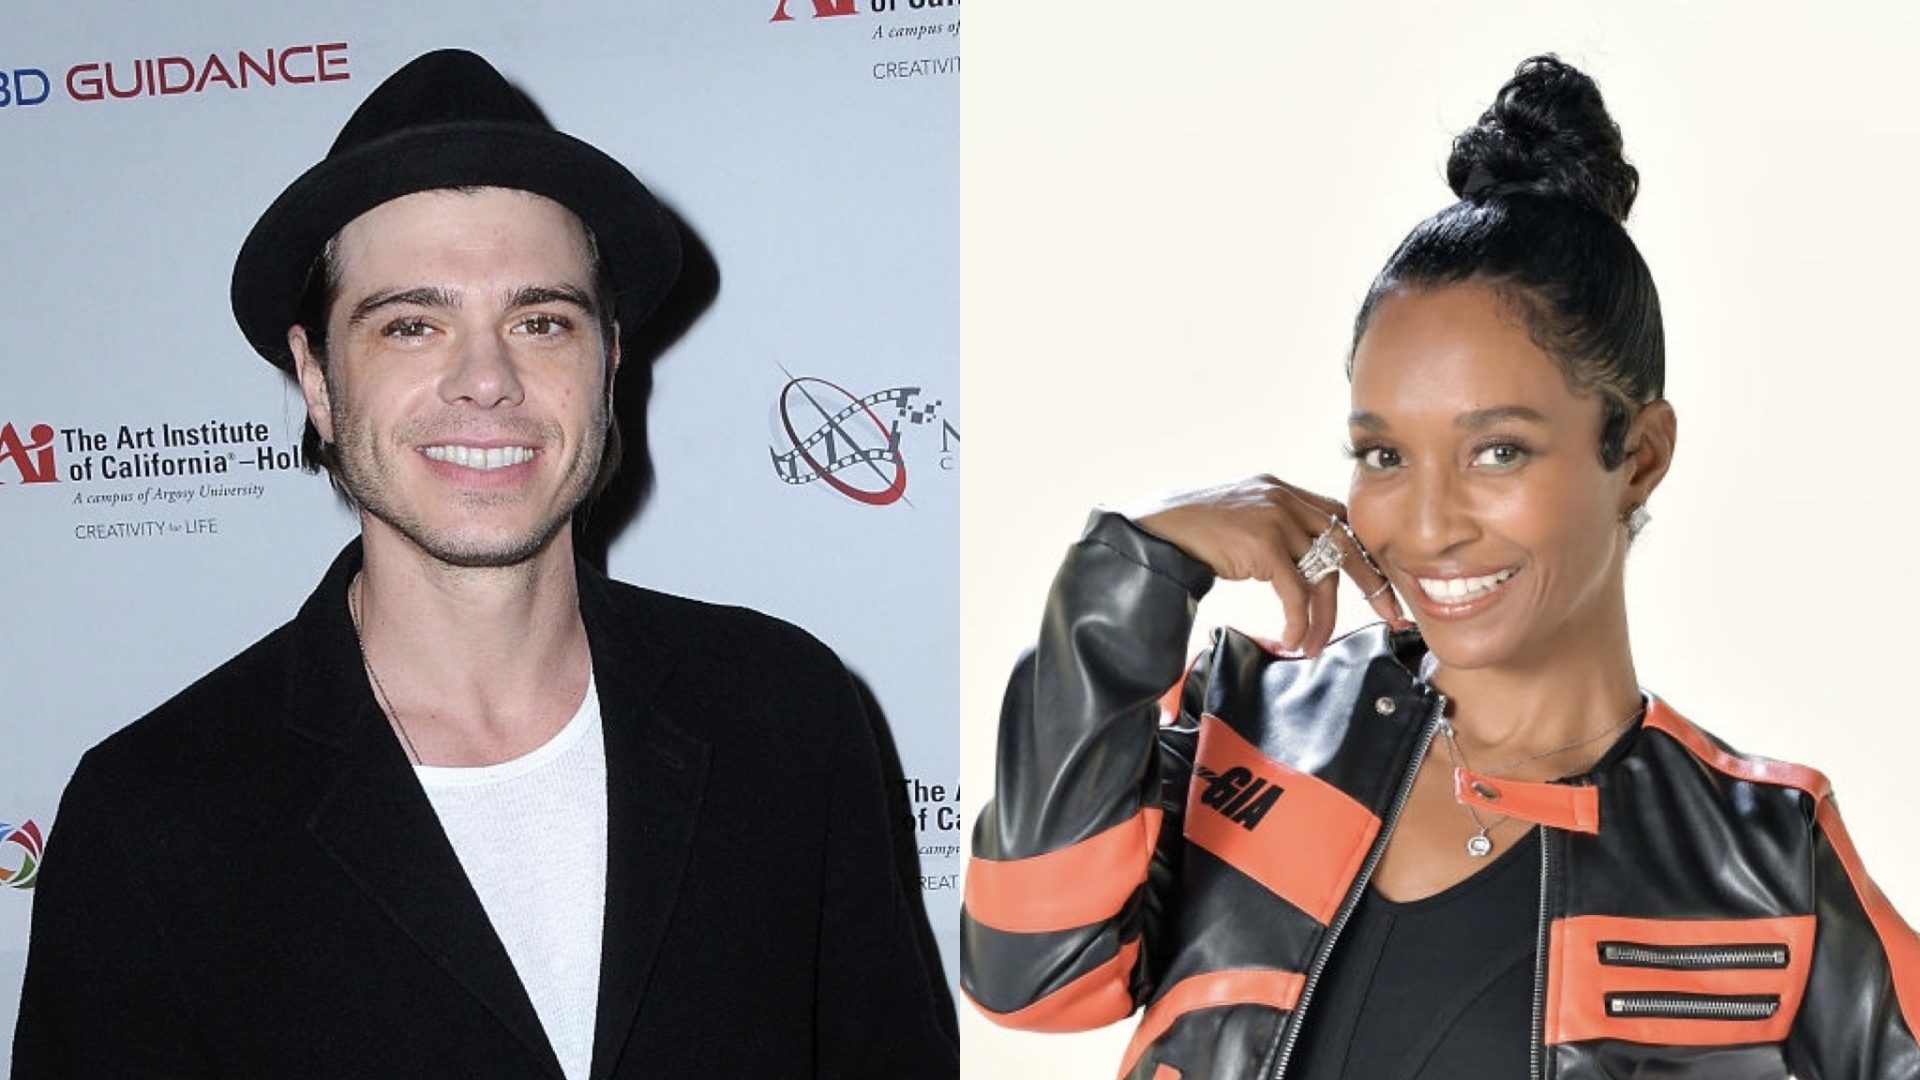 Matthew Lawrence Reveals He & Chilli Are ‘Trying’ To Have A Child Together: ‘That’s The Game Plan’ (Video)